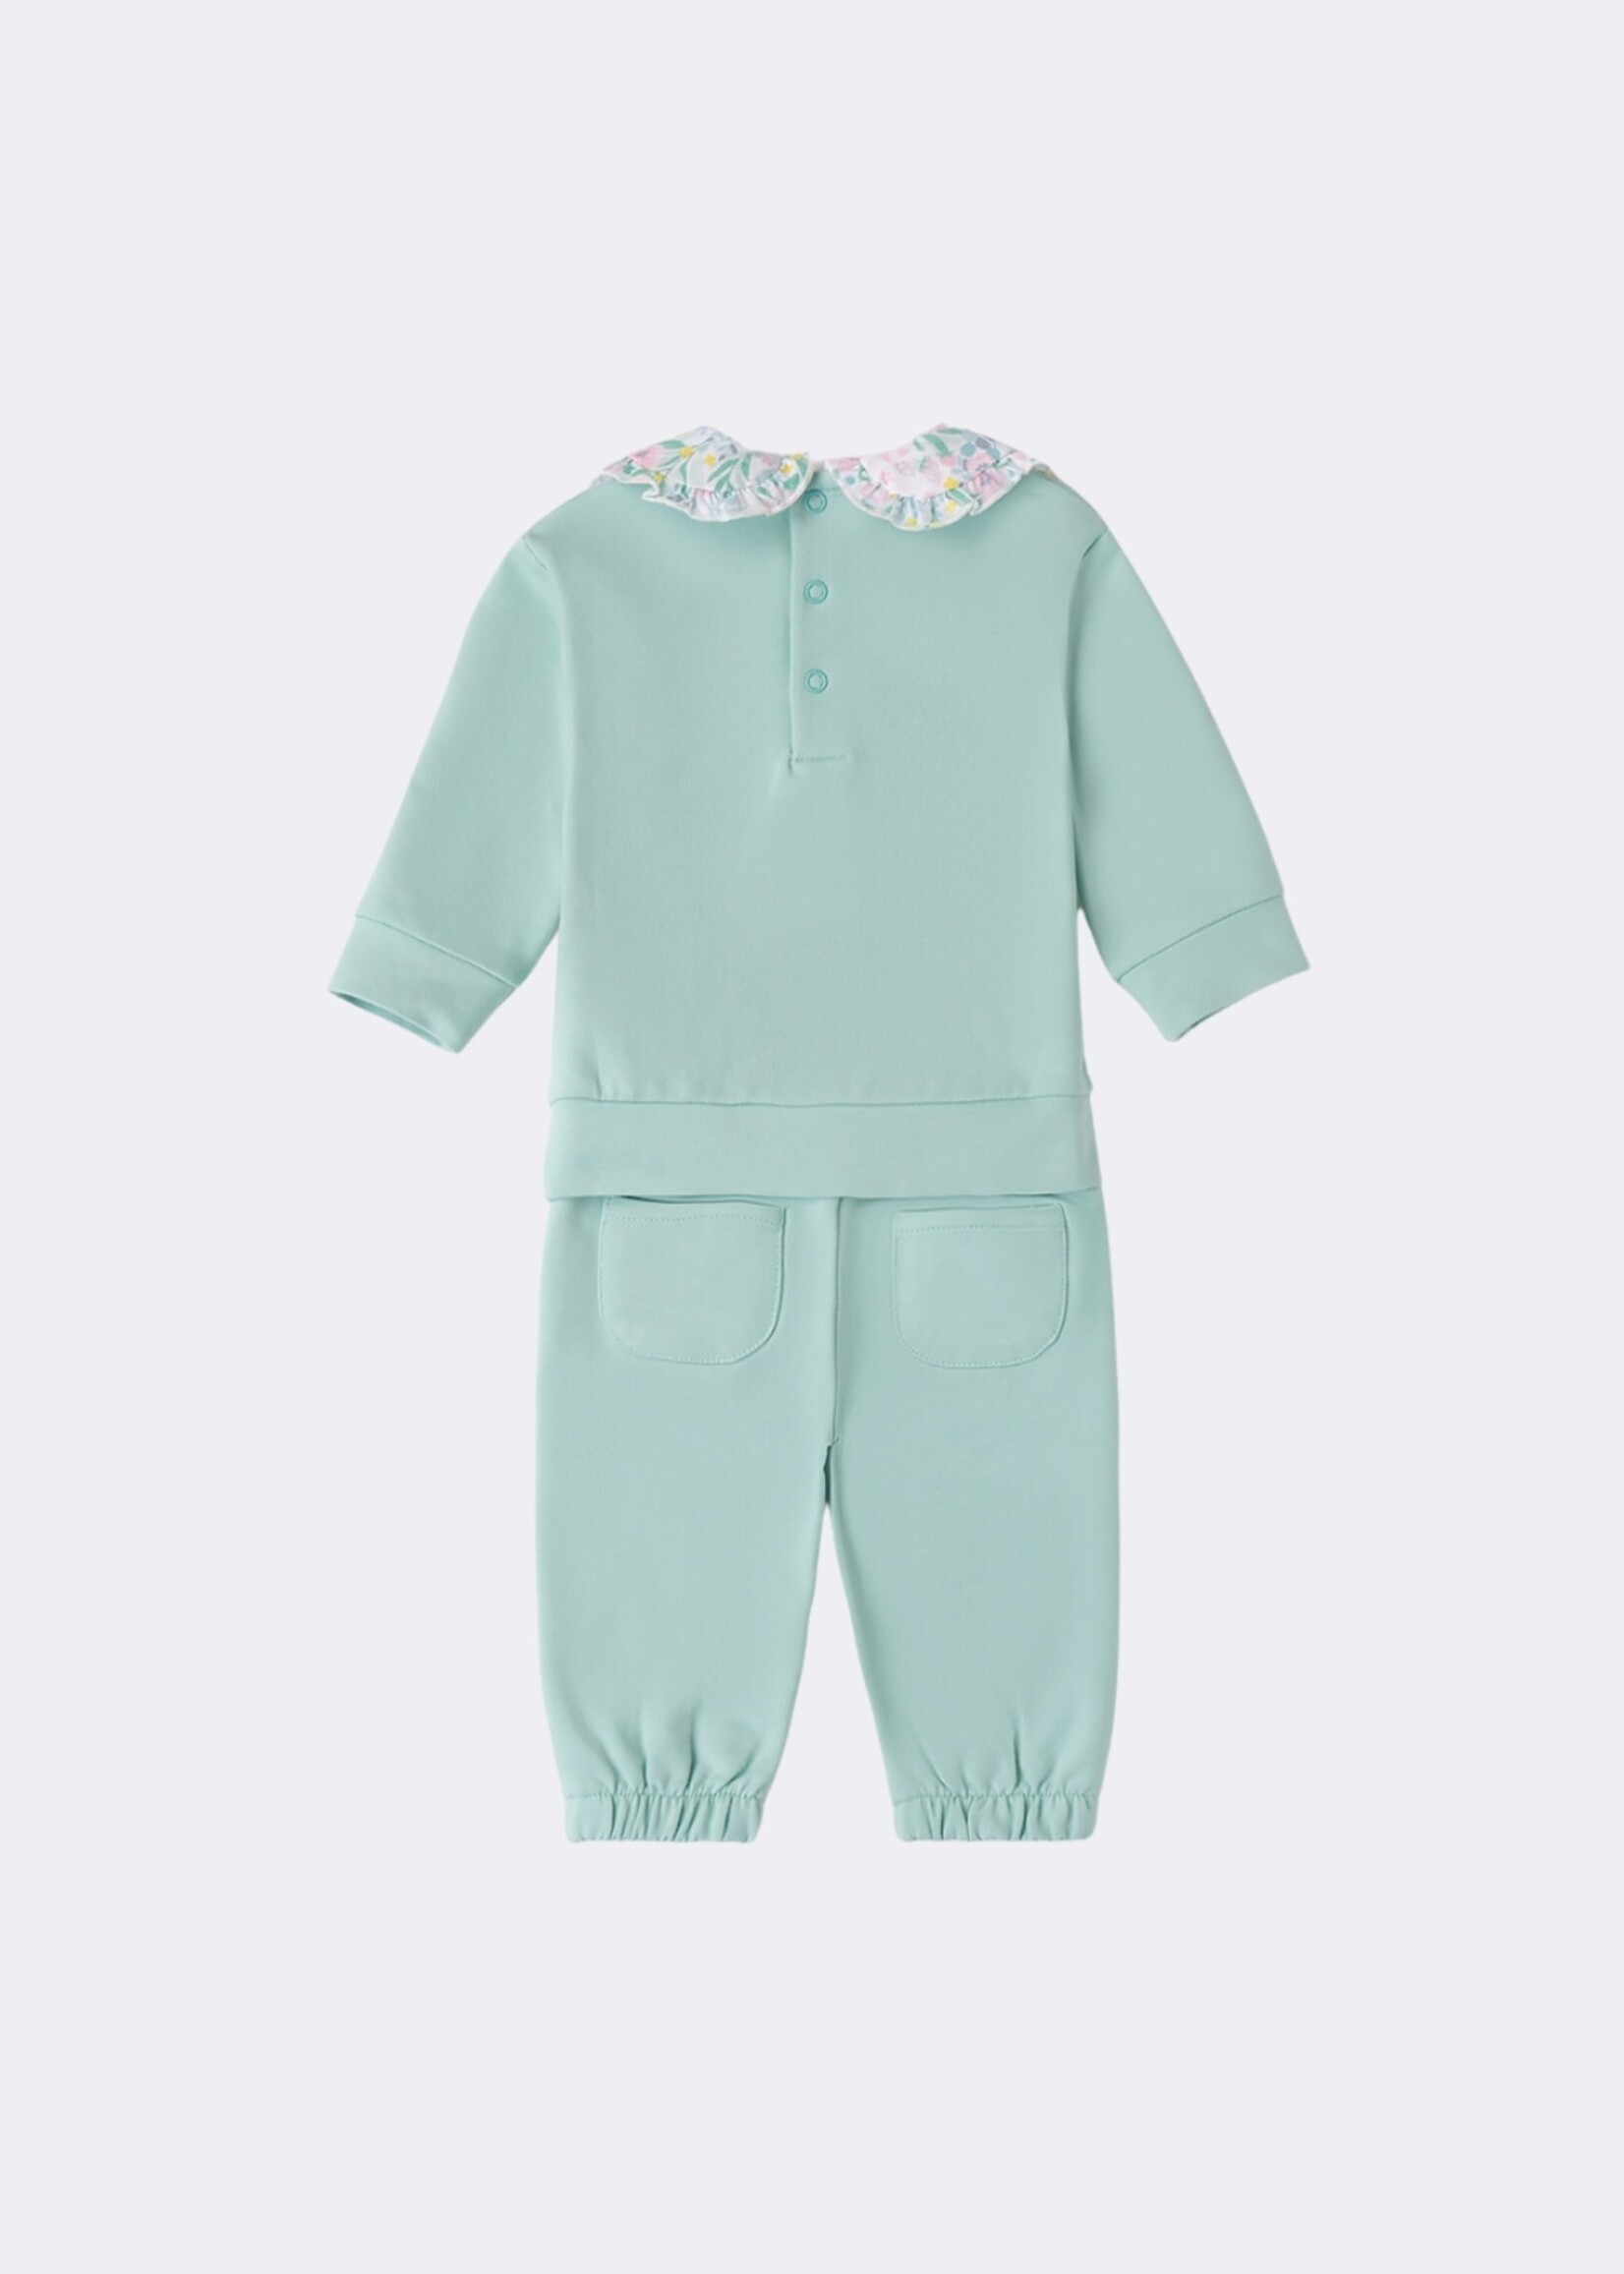 Minibanda Two Piece Outfit Turquoise